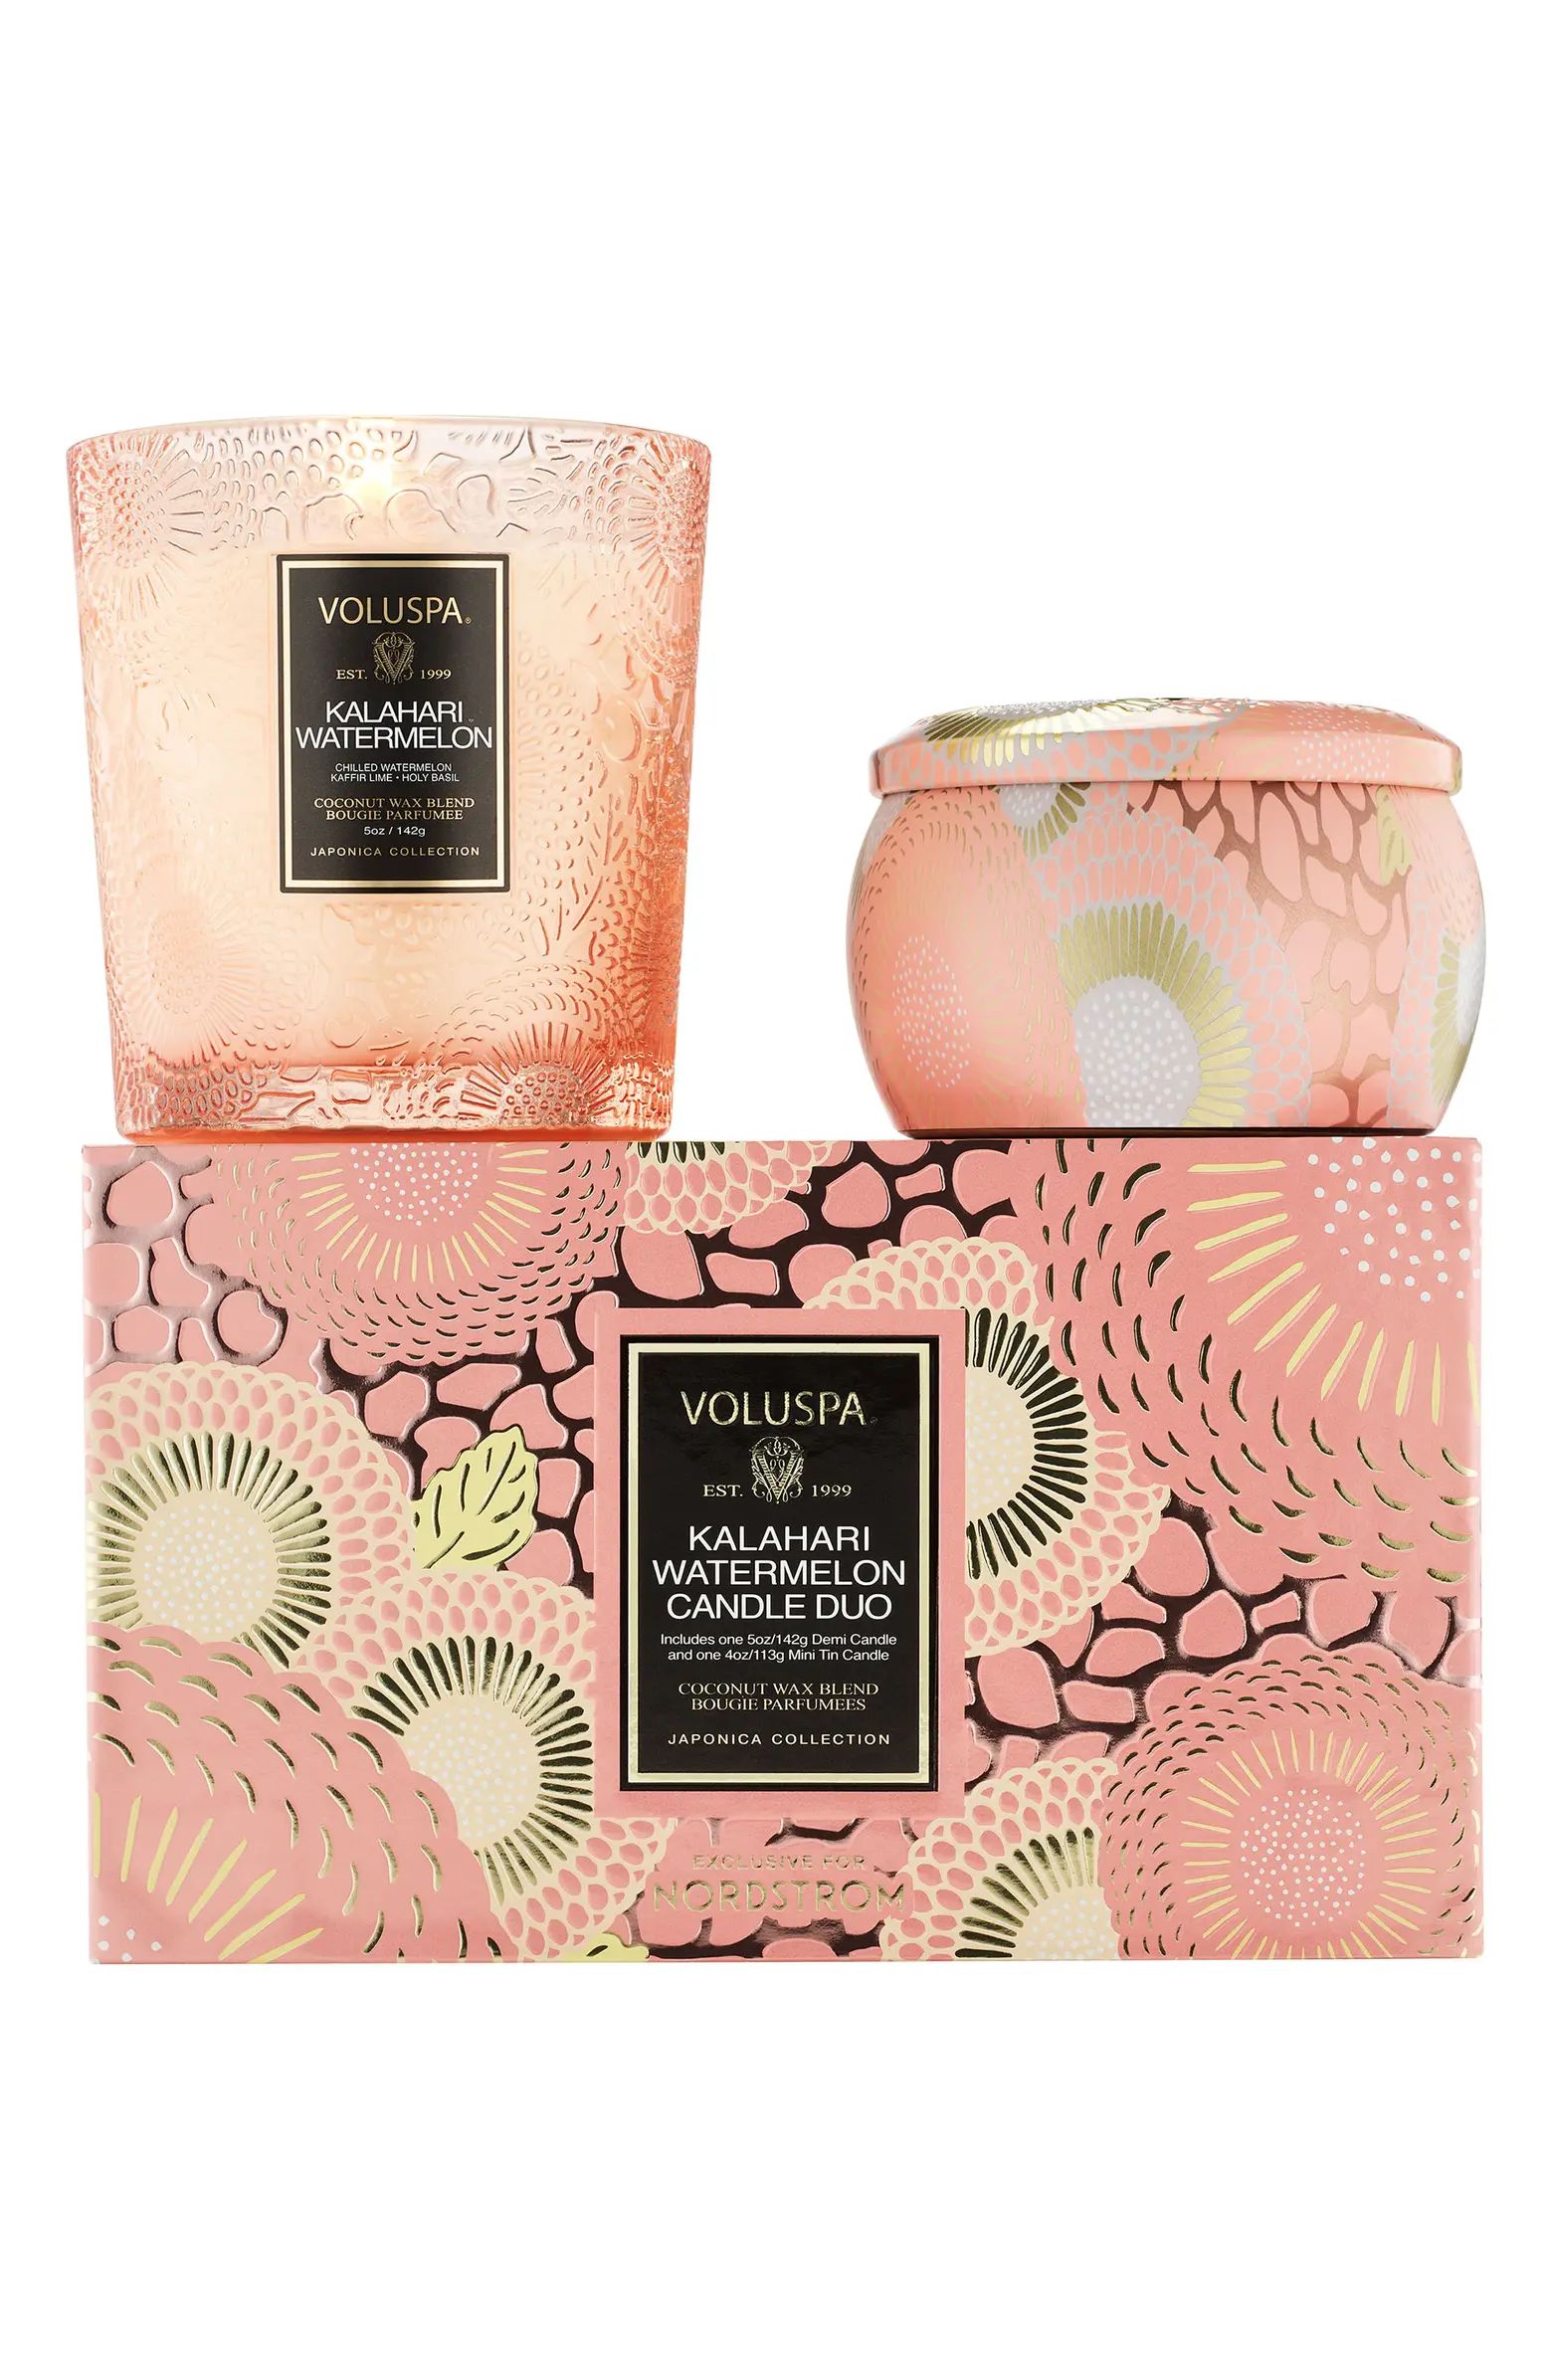 Voluspa Kalahari Watermelon Candle Duo (Limited Edition) (Nordstrom Exclusive) $32 Value | Nordst... | Nordstrom